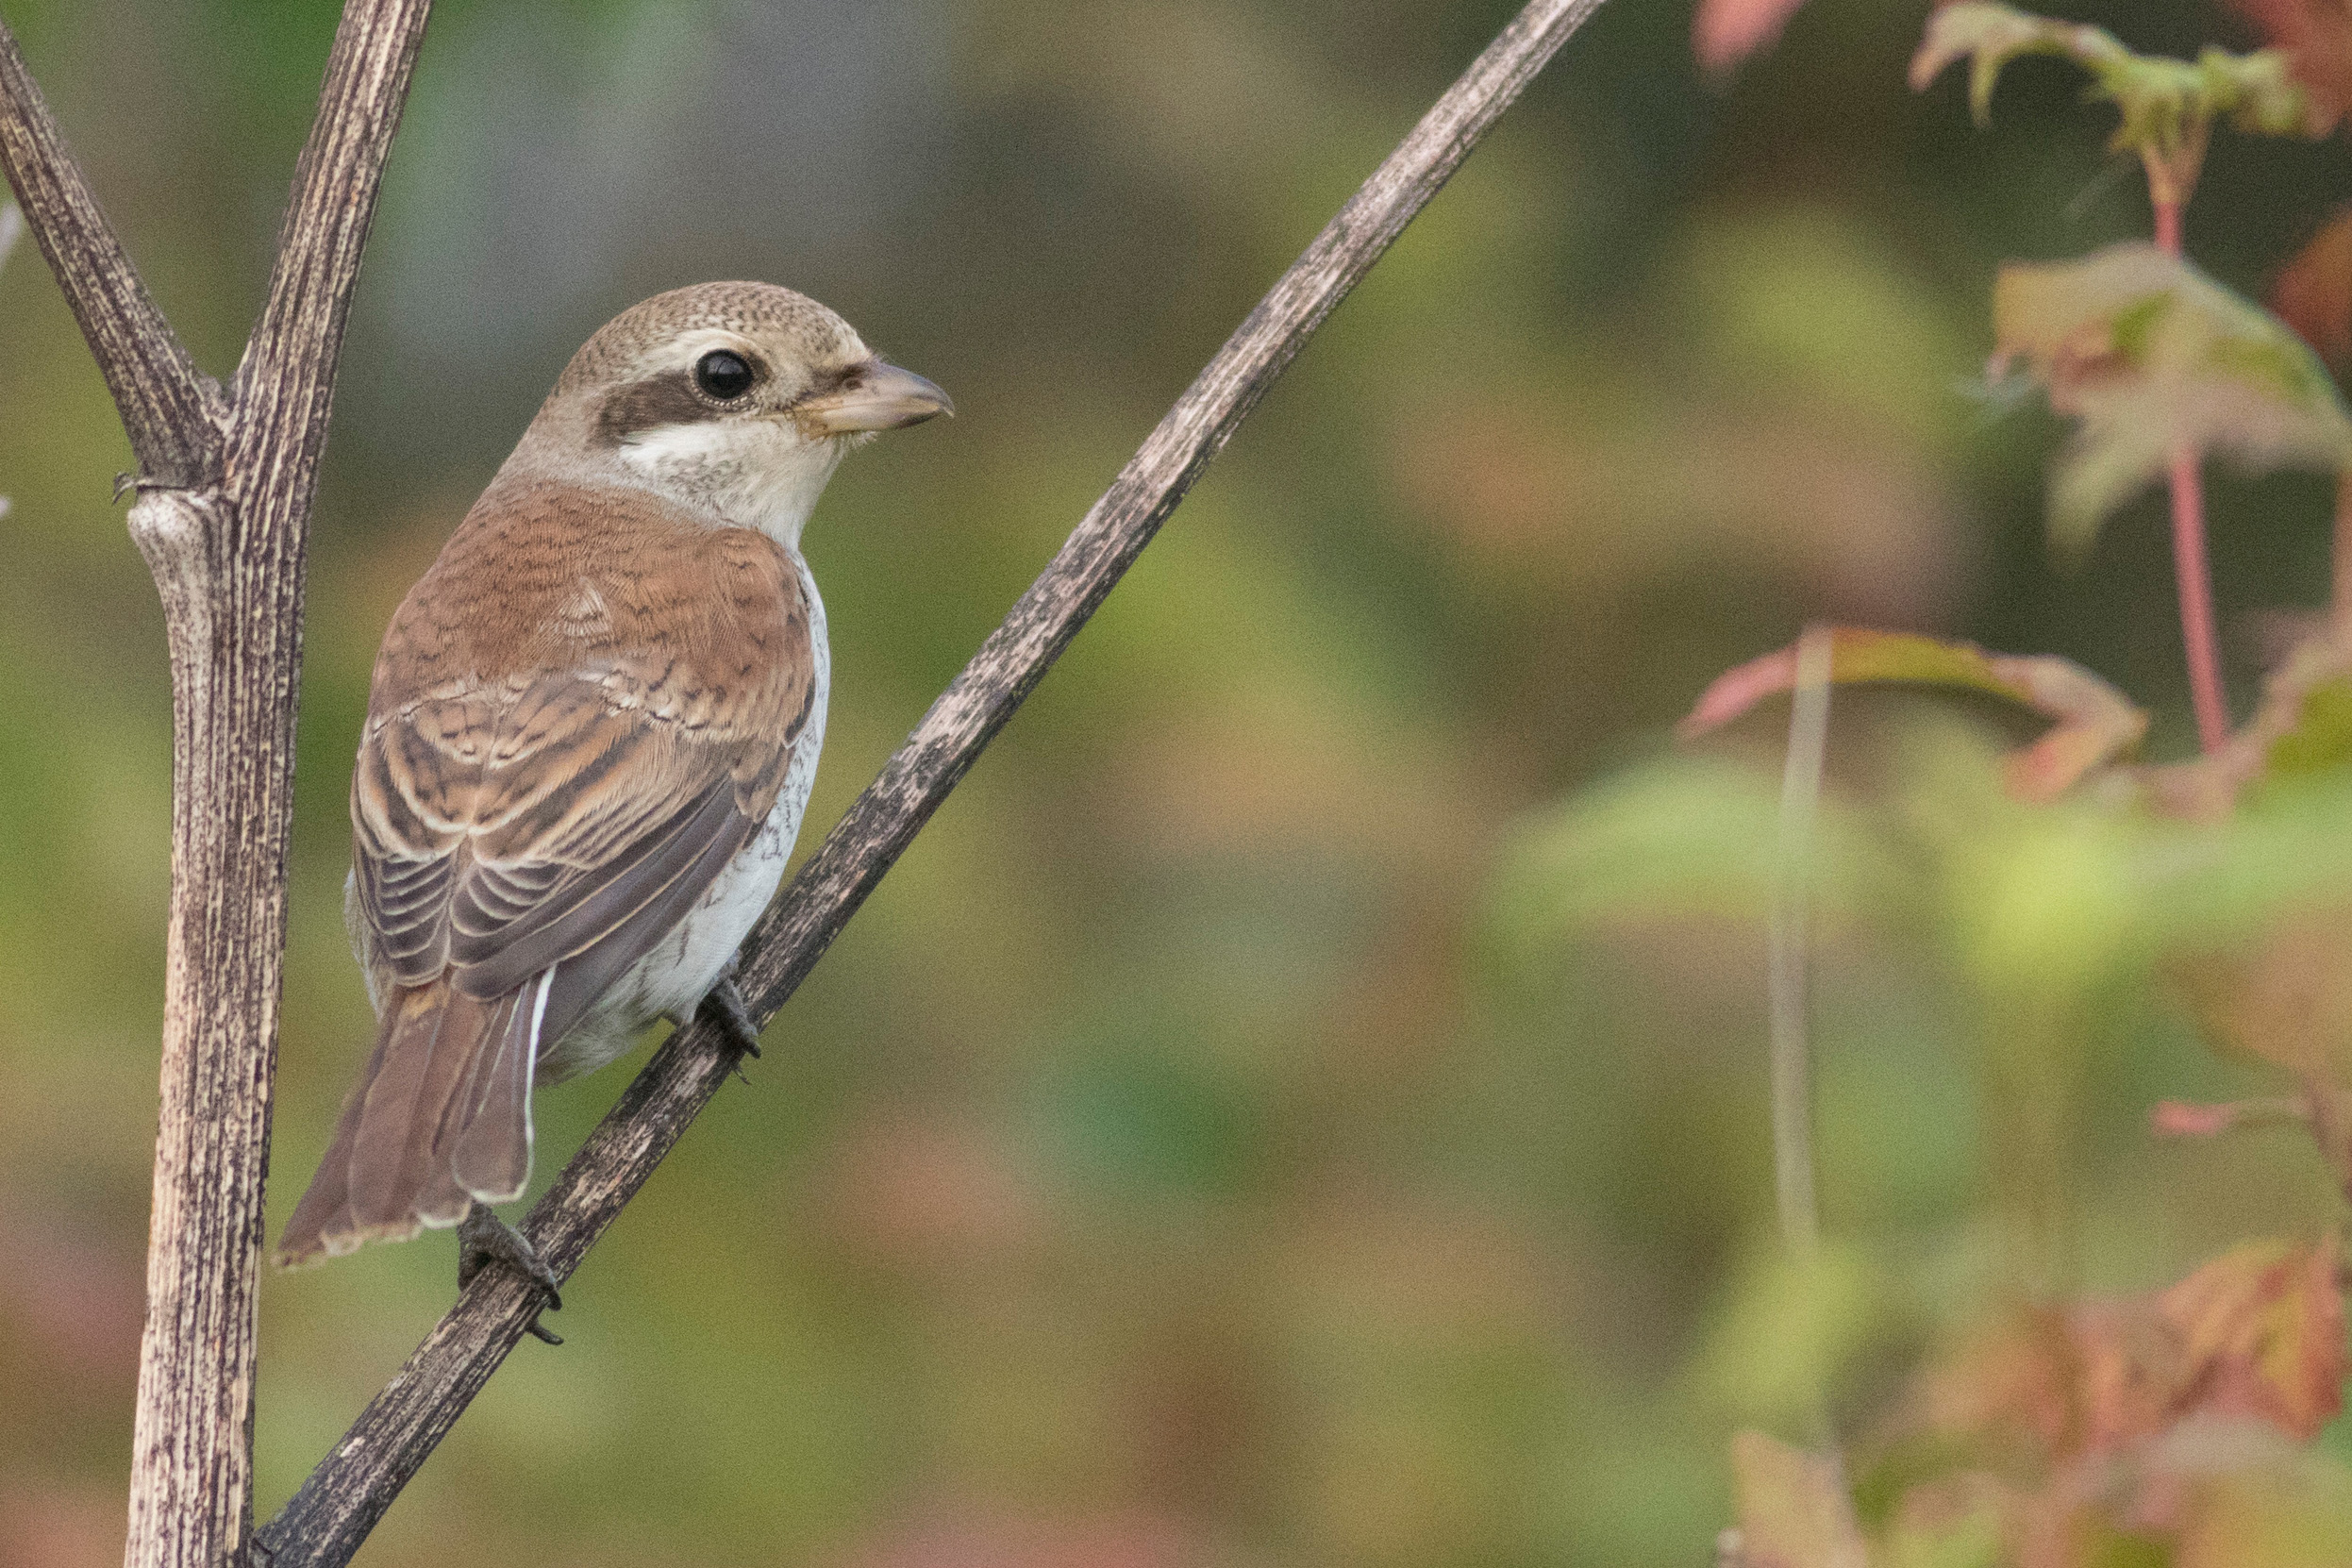 A female Red-backed Shrike sat on a tree branch.